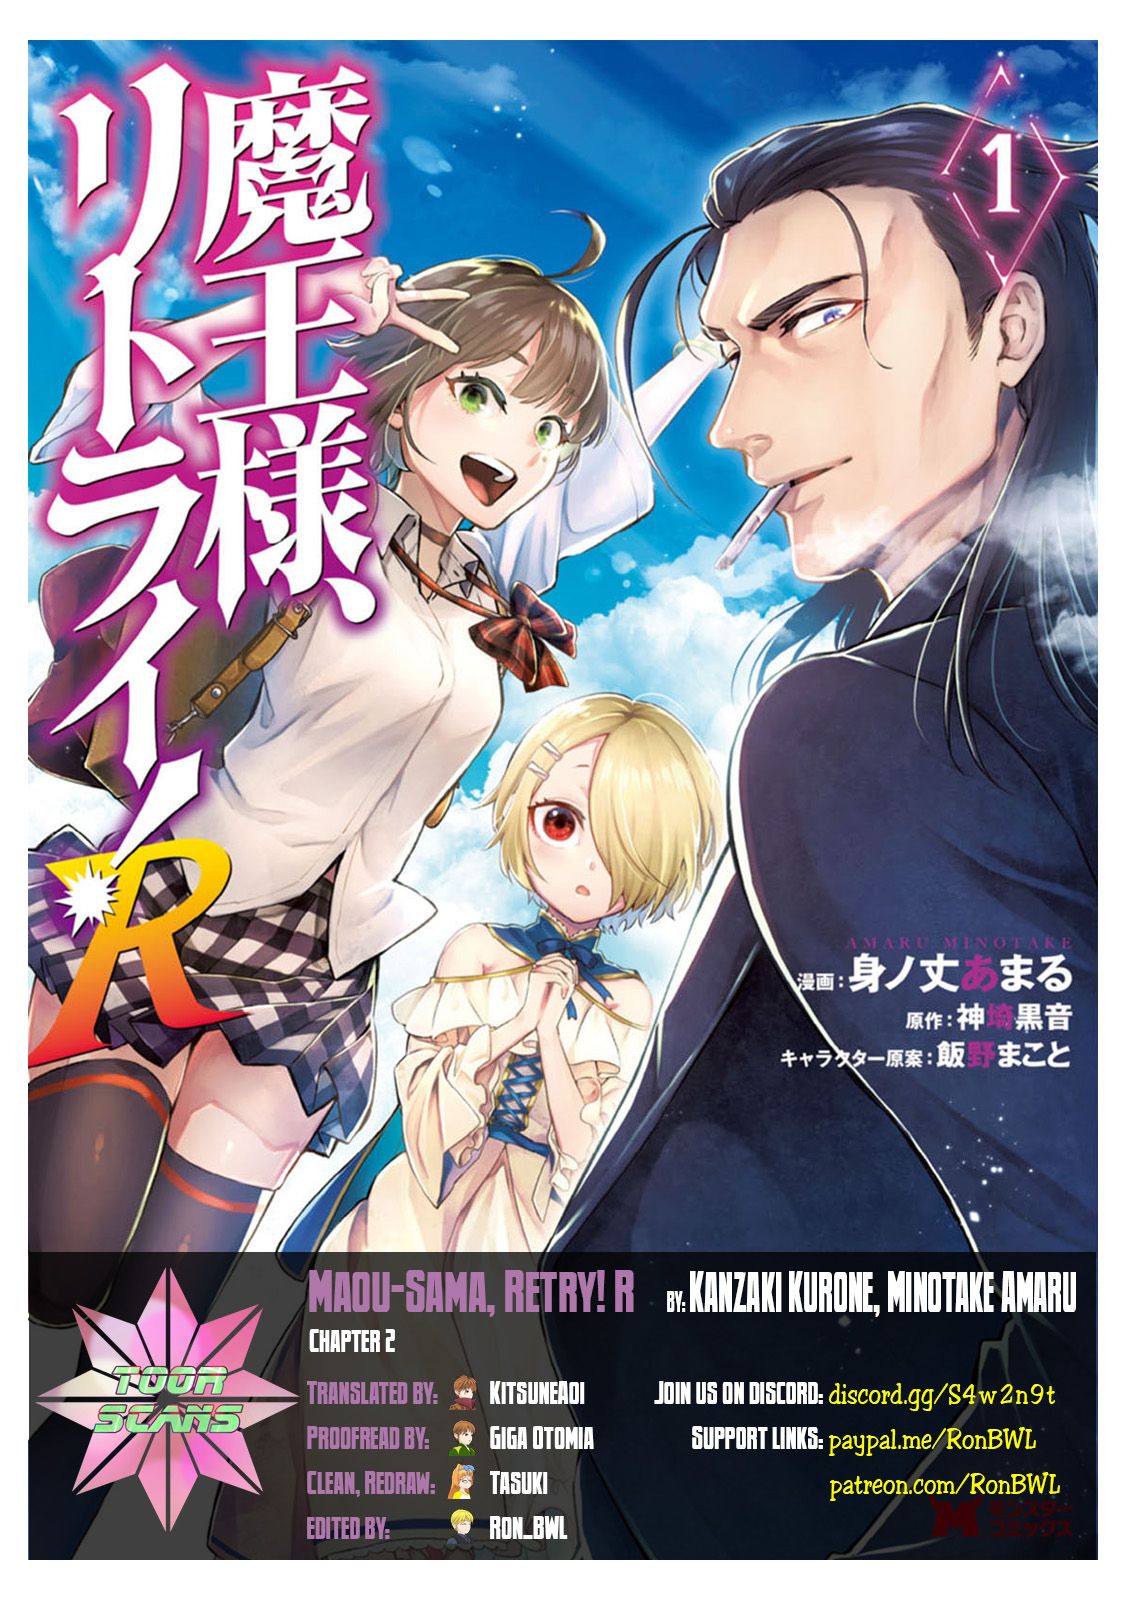 Maou-sama, Retry! R Chapter 31: Release Date, Spoilers & Where to